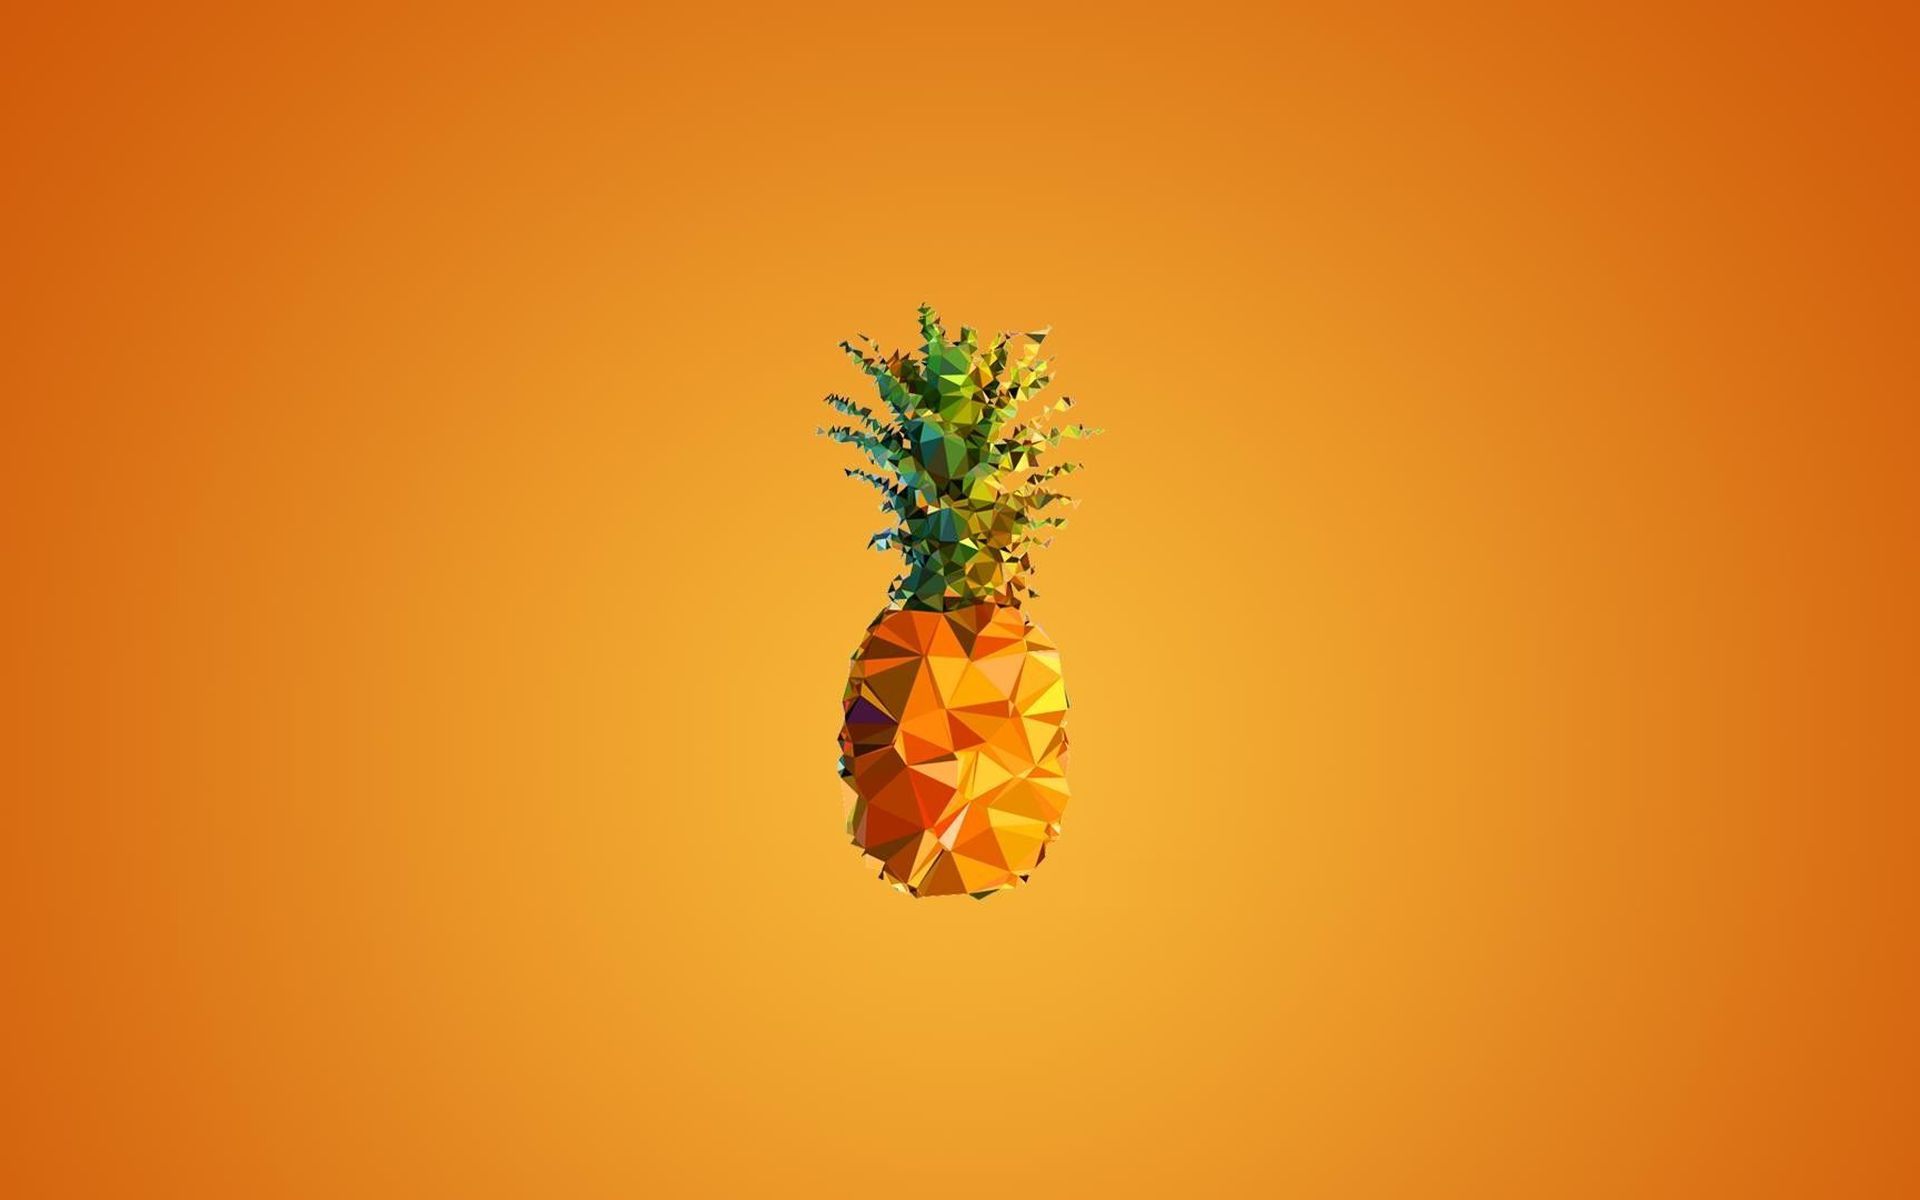 Be A Pineapple Wallpapers